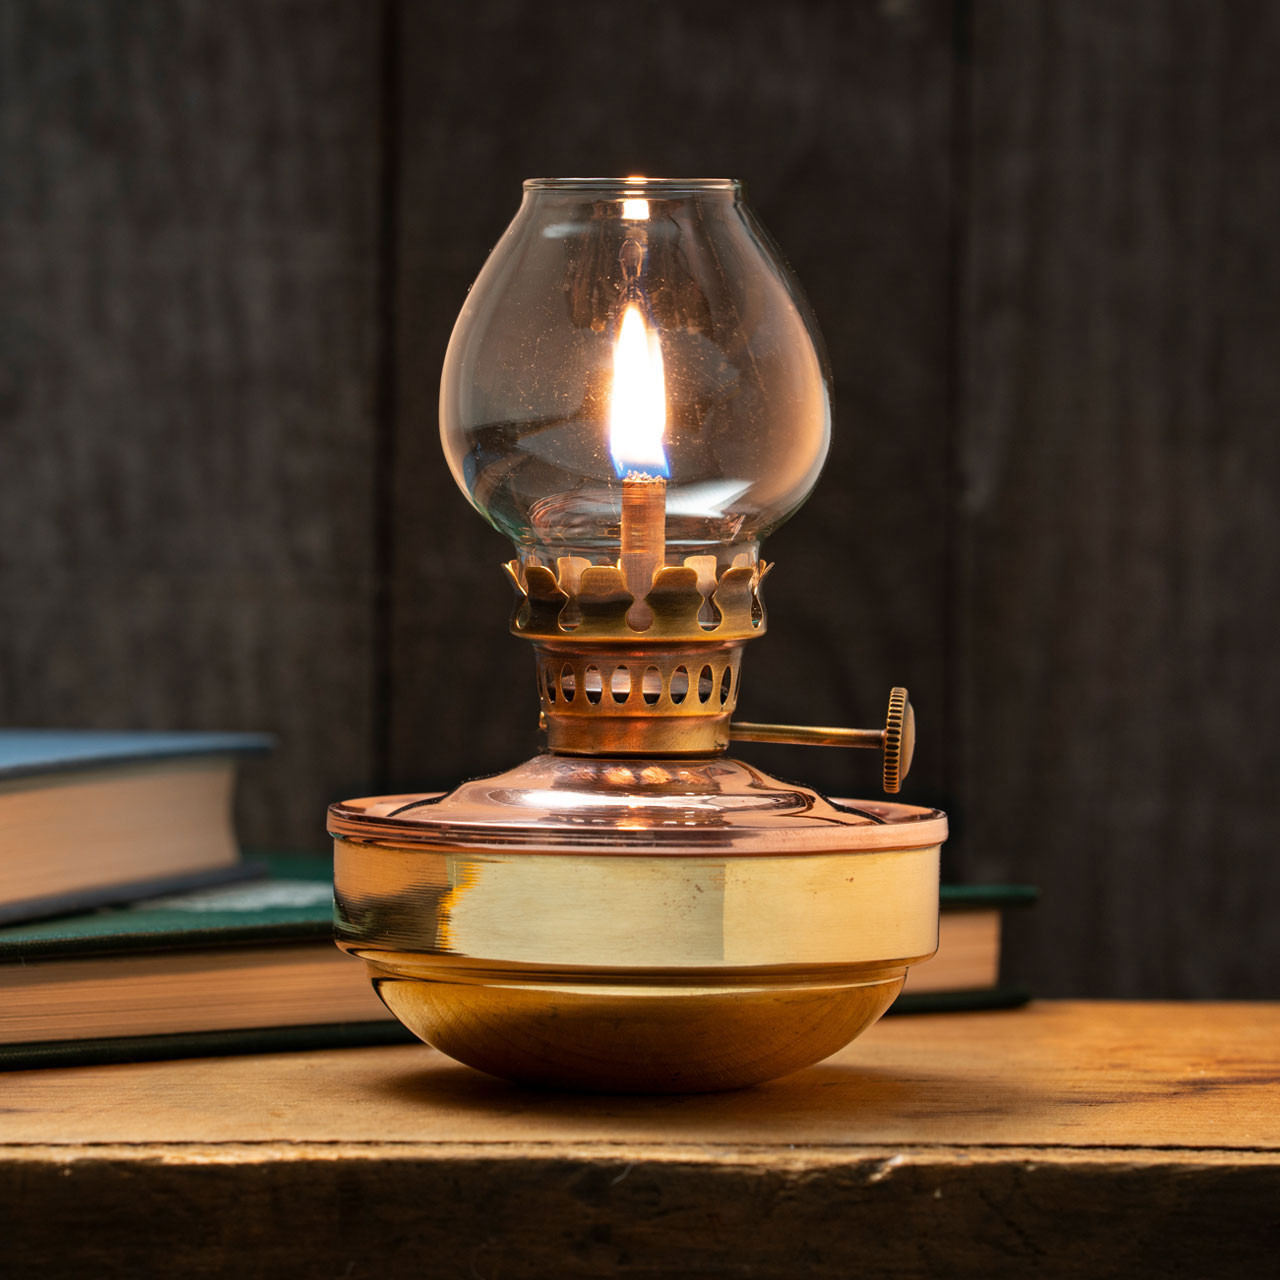 What Are The Parts Of An Oil Lamp Called